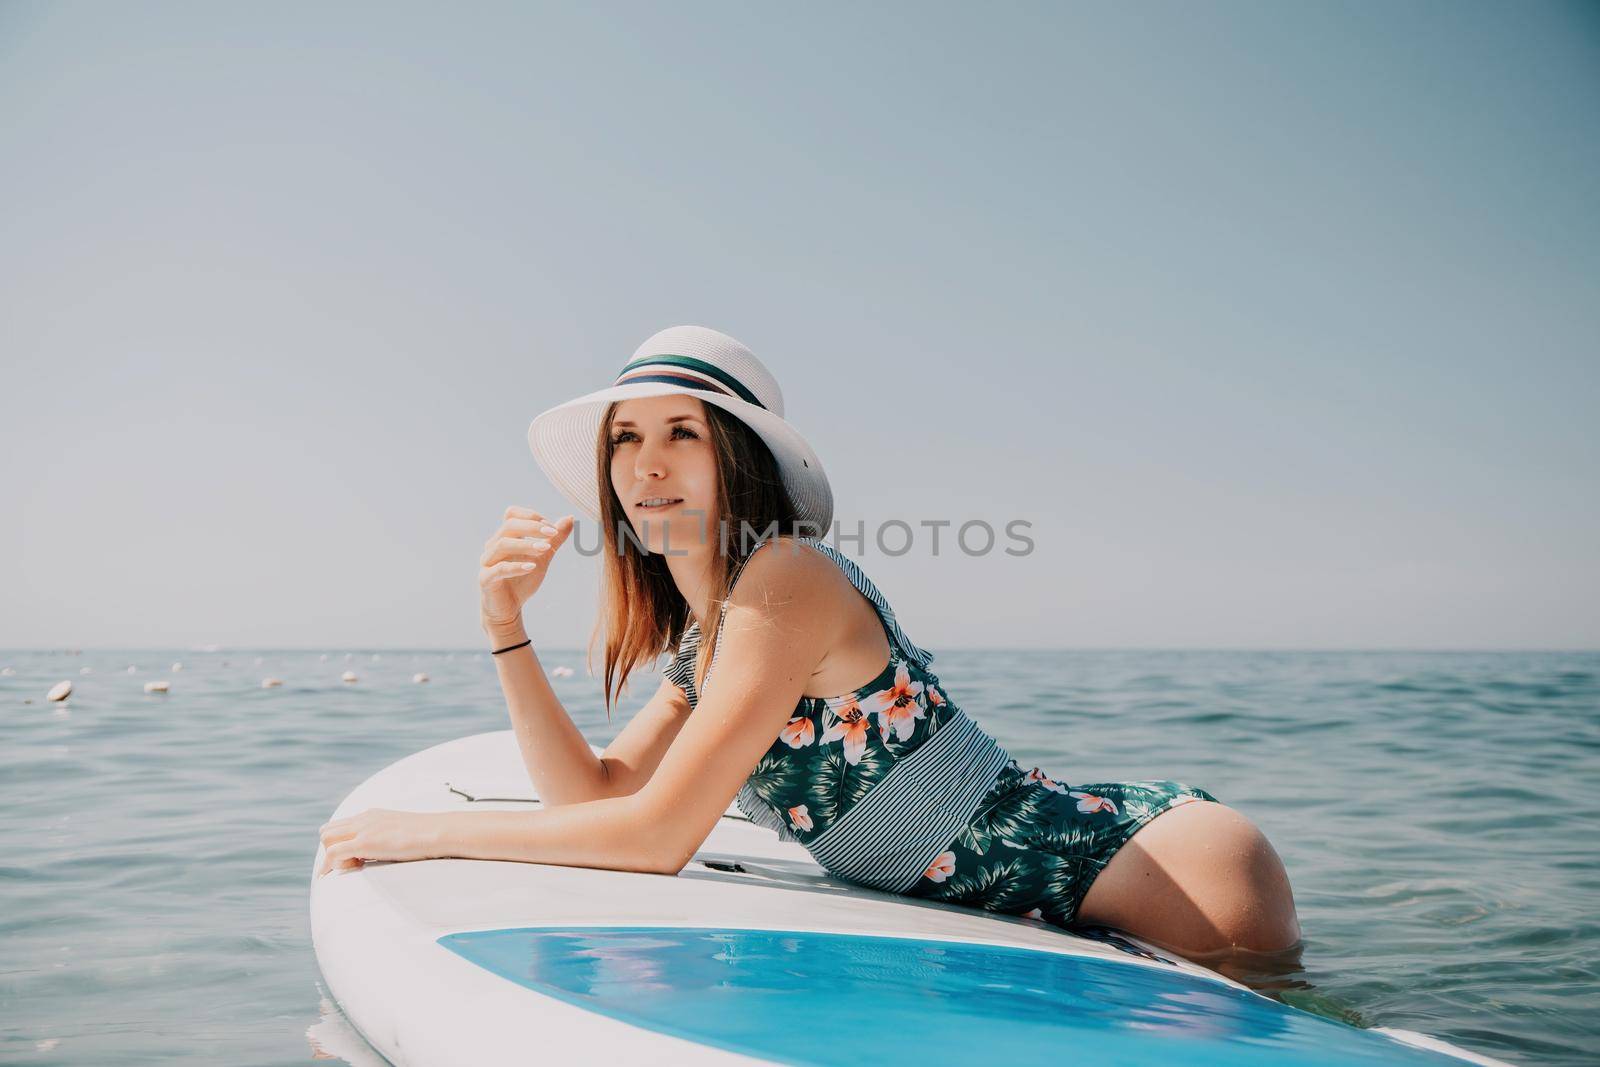 Happy young woman in swimsuits doing yoga on sup board in calm sea, early morning. Balanced pose - concept of healthy life and natural balance between body and mental development